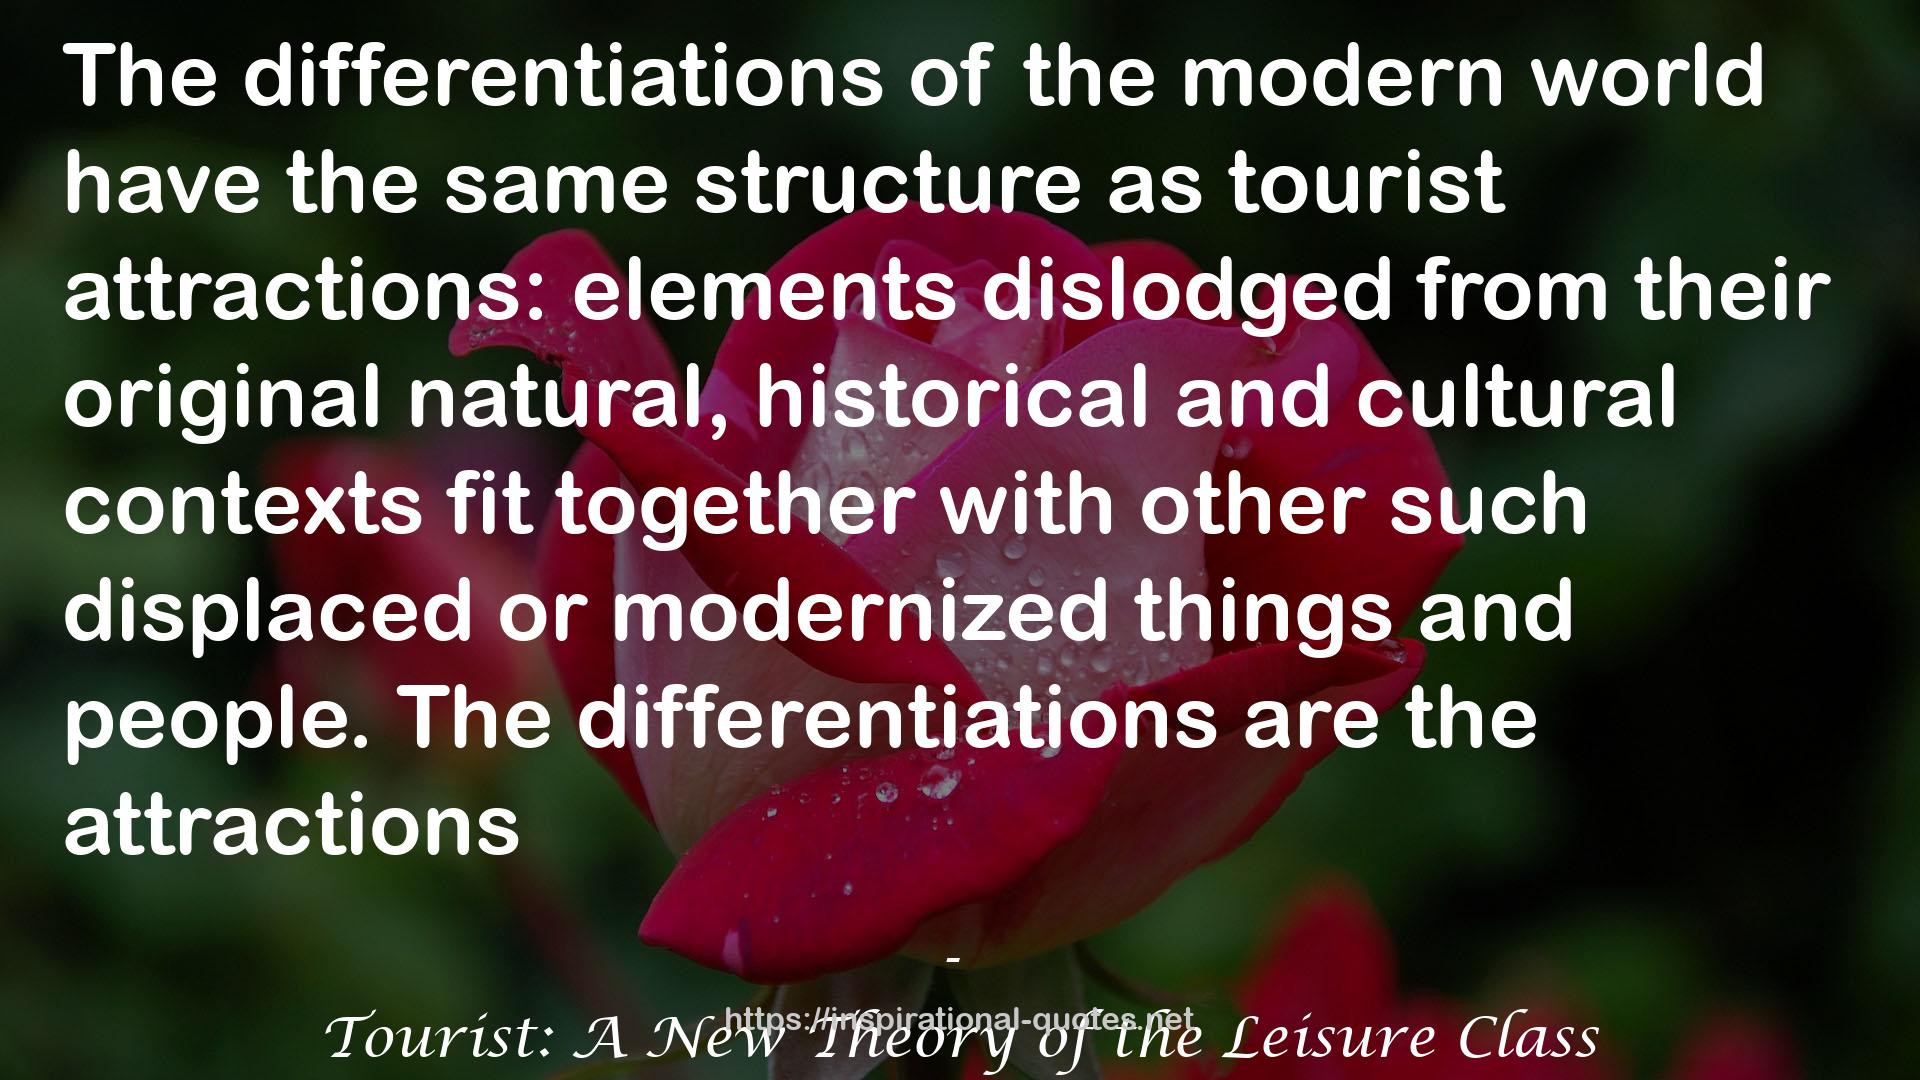 Tourist: A New Theory of the Leisure Class QUOTES